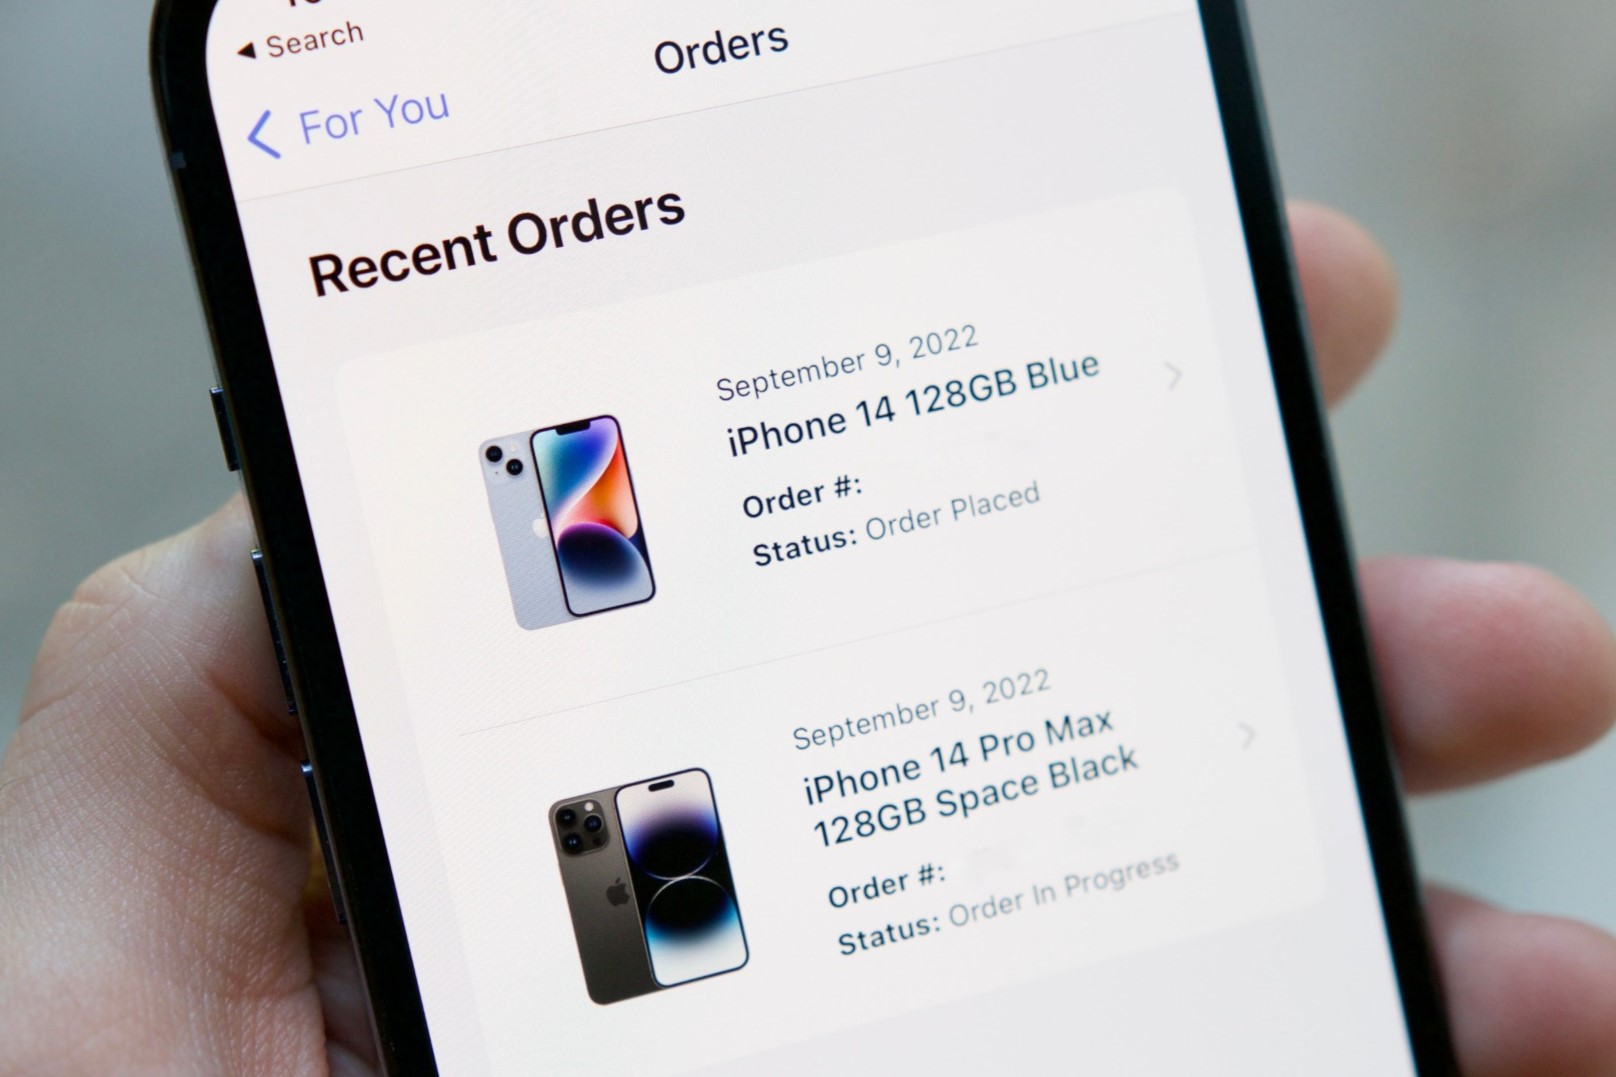 ordering-availability-information-on-ordering-the-new-iphone-14